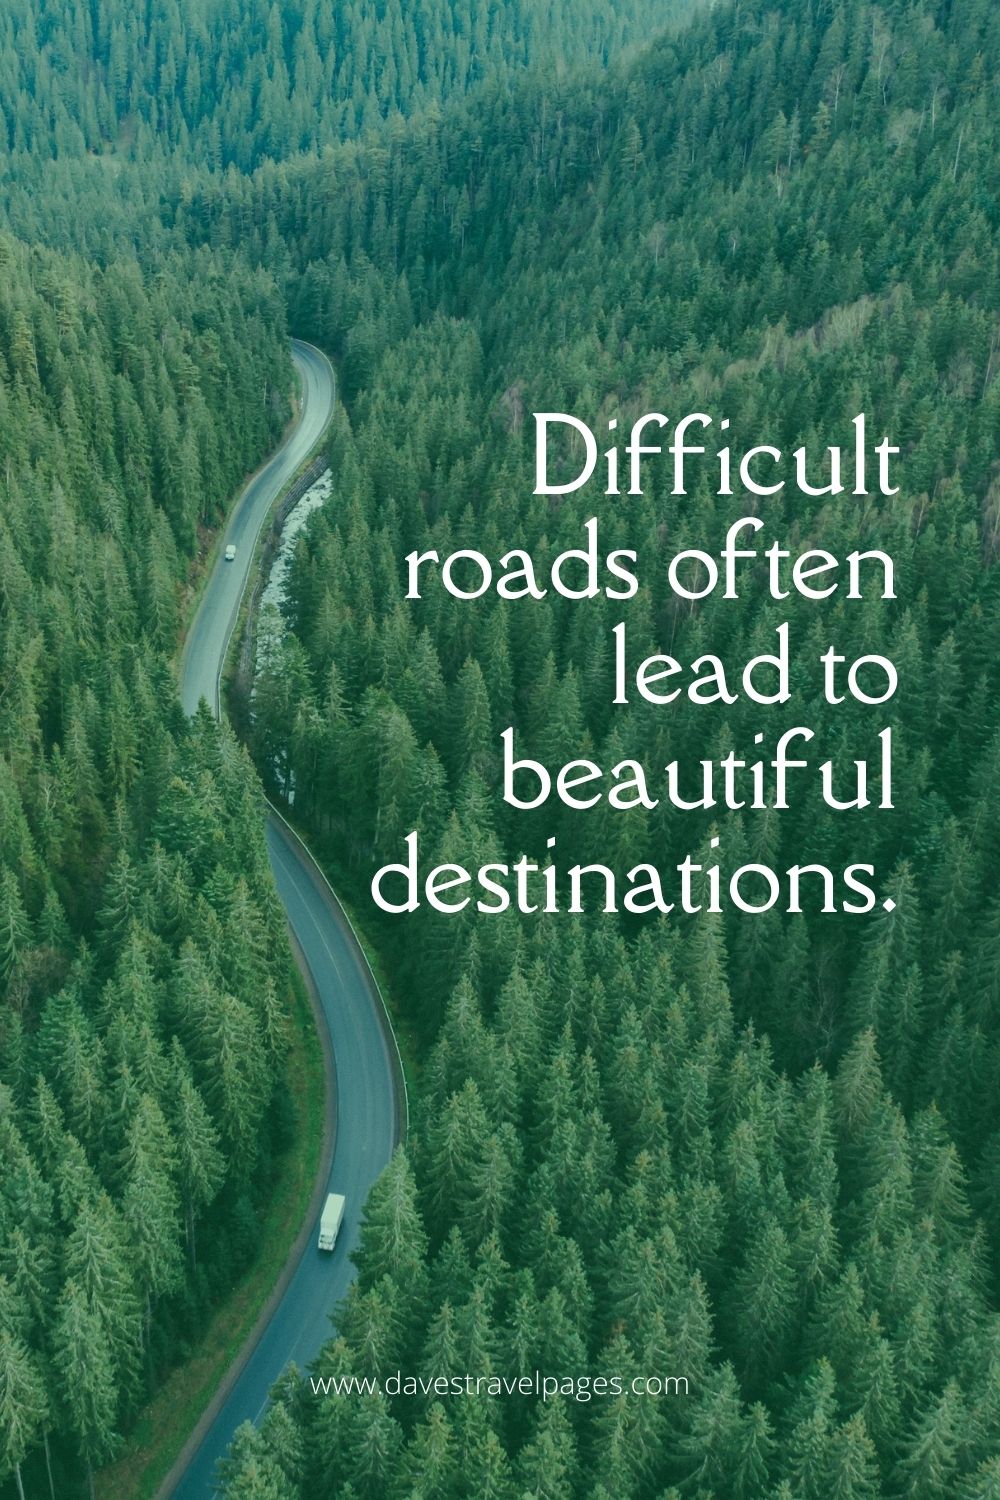 Difficult roads lead to beautiful destinations instagram captions